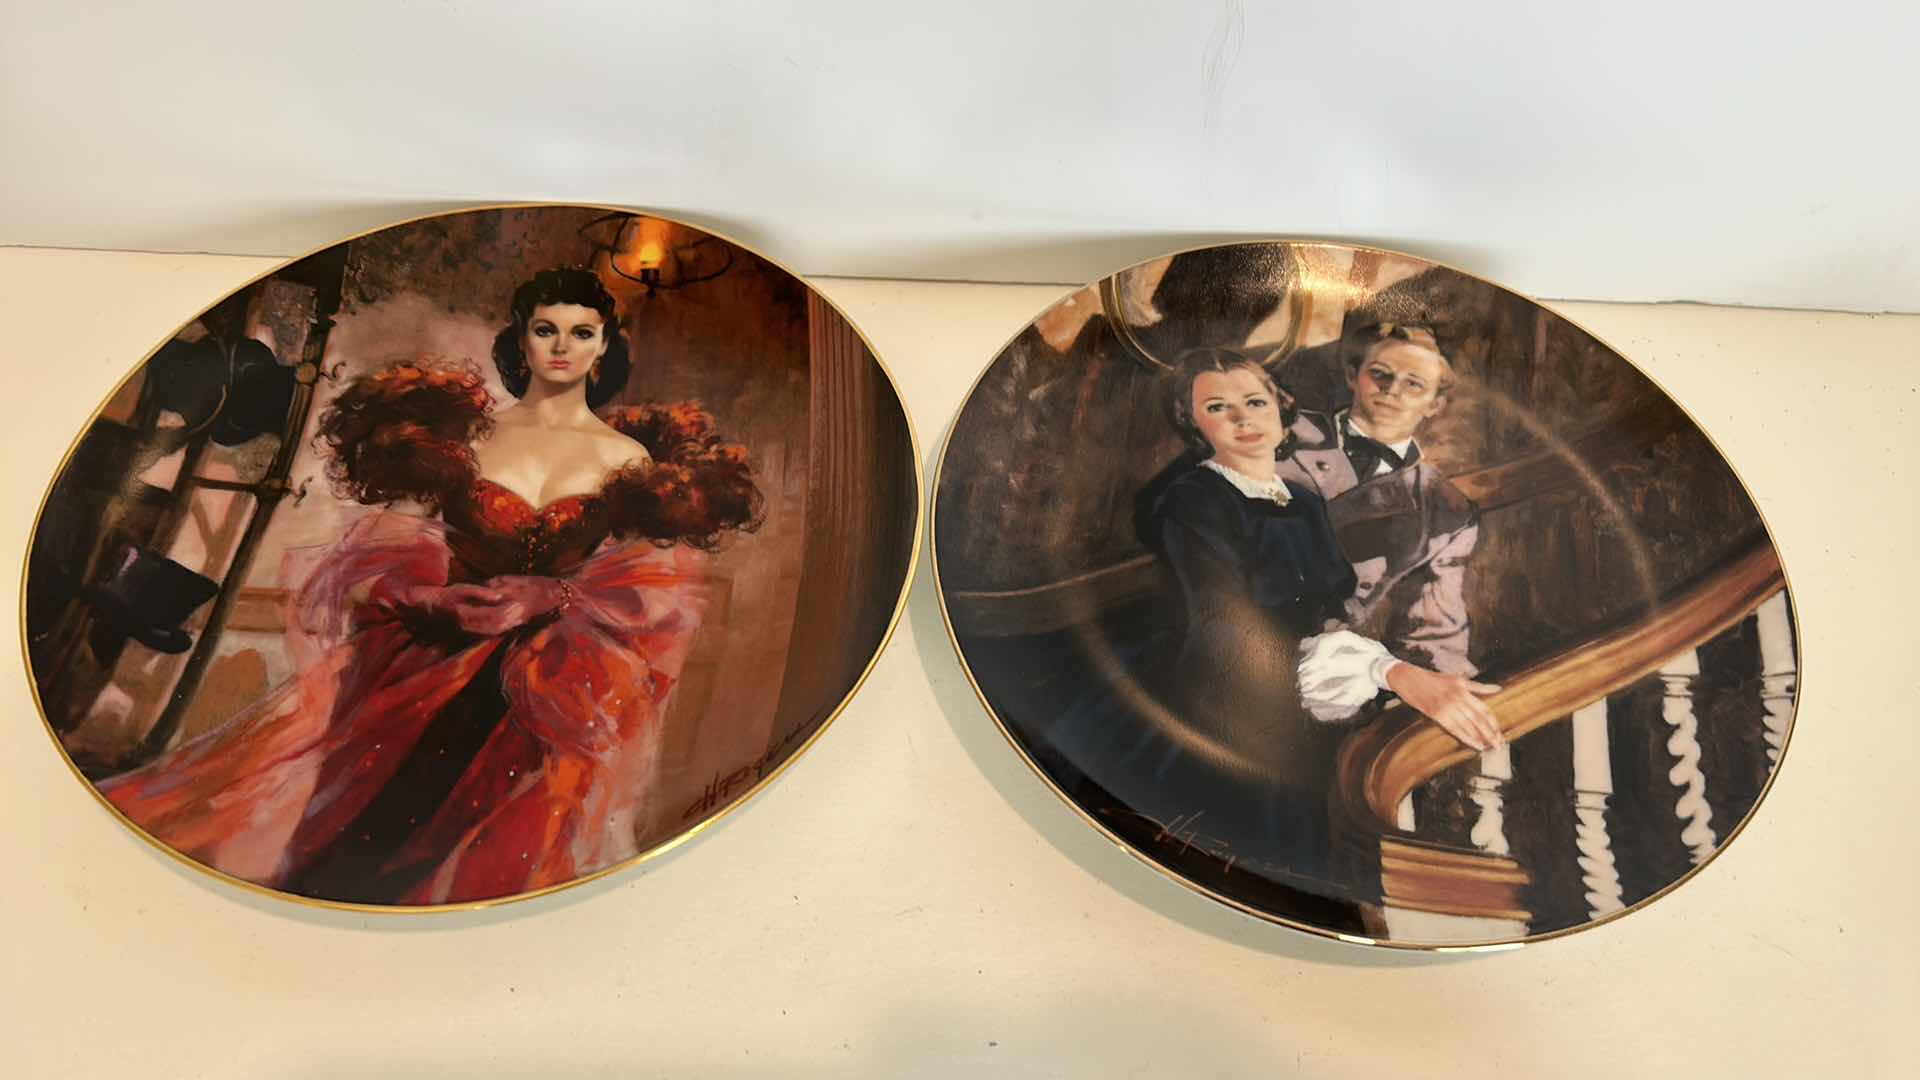 Photo 1 of 2 - COLLECTIBLE FINE CHINA “GONE WITH THE WIND” GOLDEN ANNIVERSARY SERIES BY W.L. GEORGE NUMBERED PLATES 8.5”